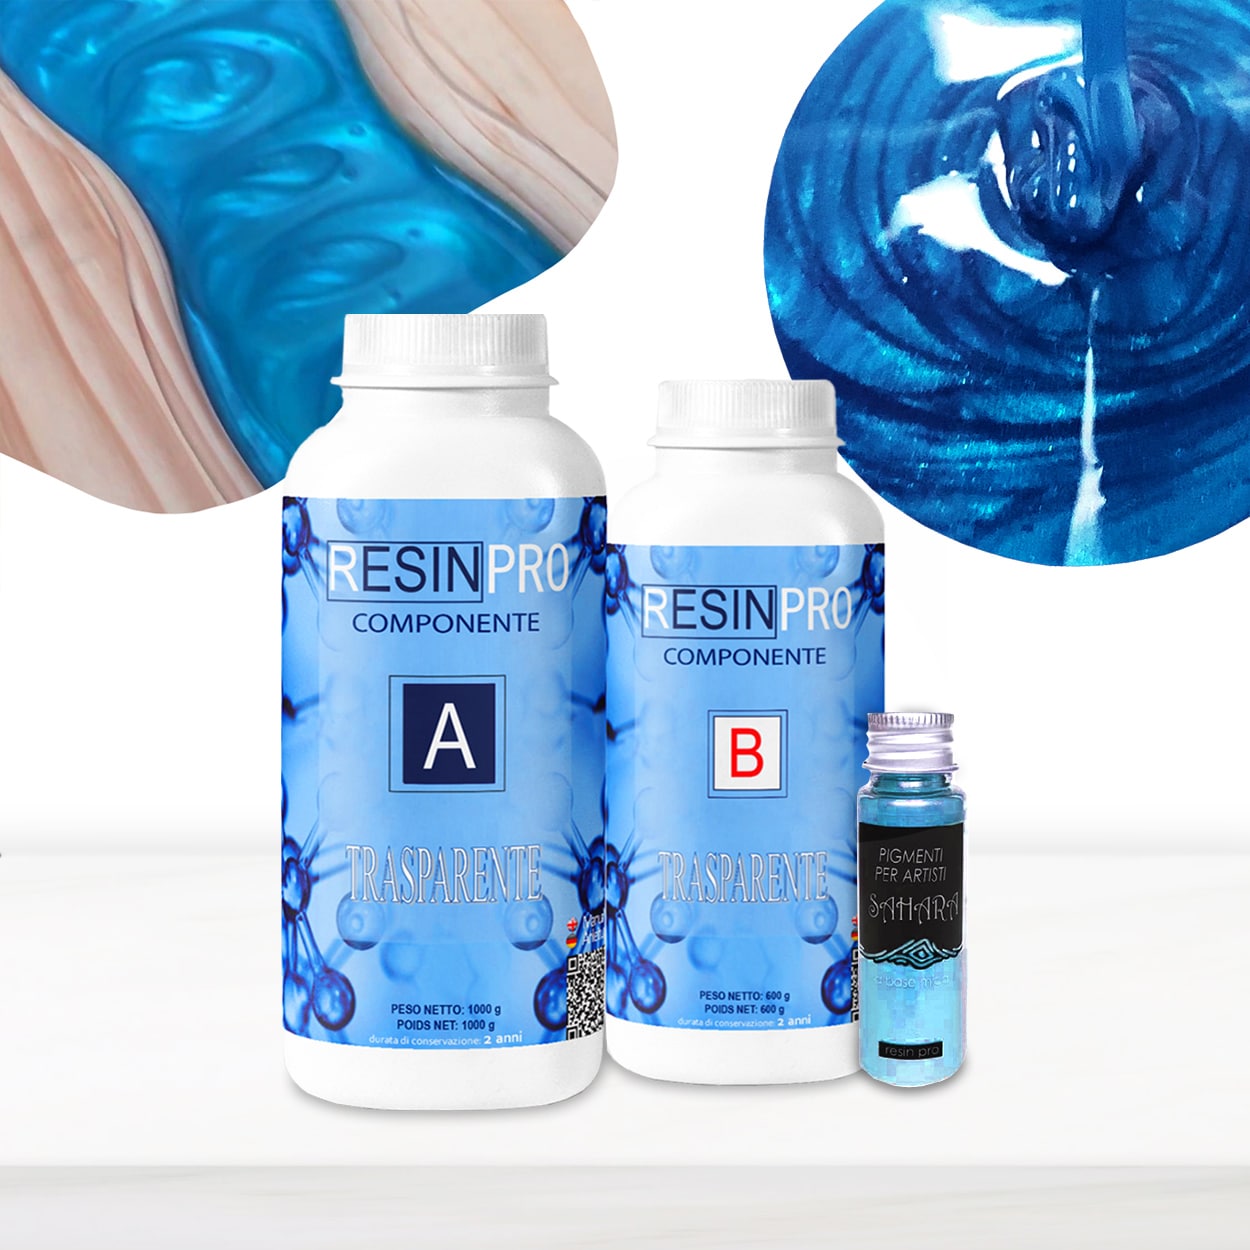 Resin Pro – ResinPro – Creativity at your service